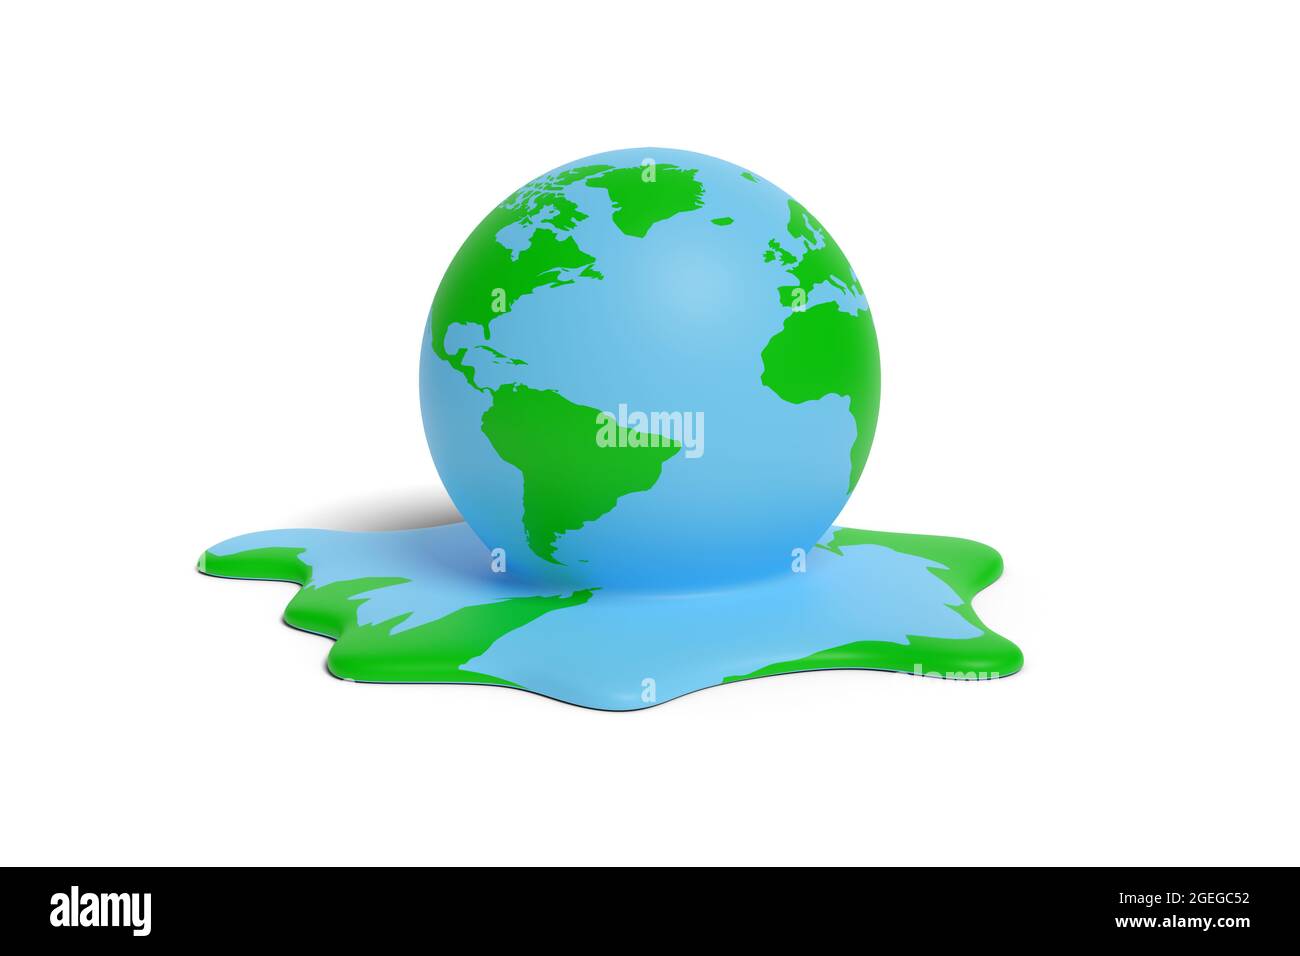 Planet earth melting isolated on white background. Global warming concept. 3d illustration. Stock Photo